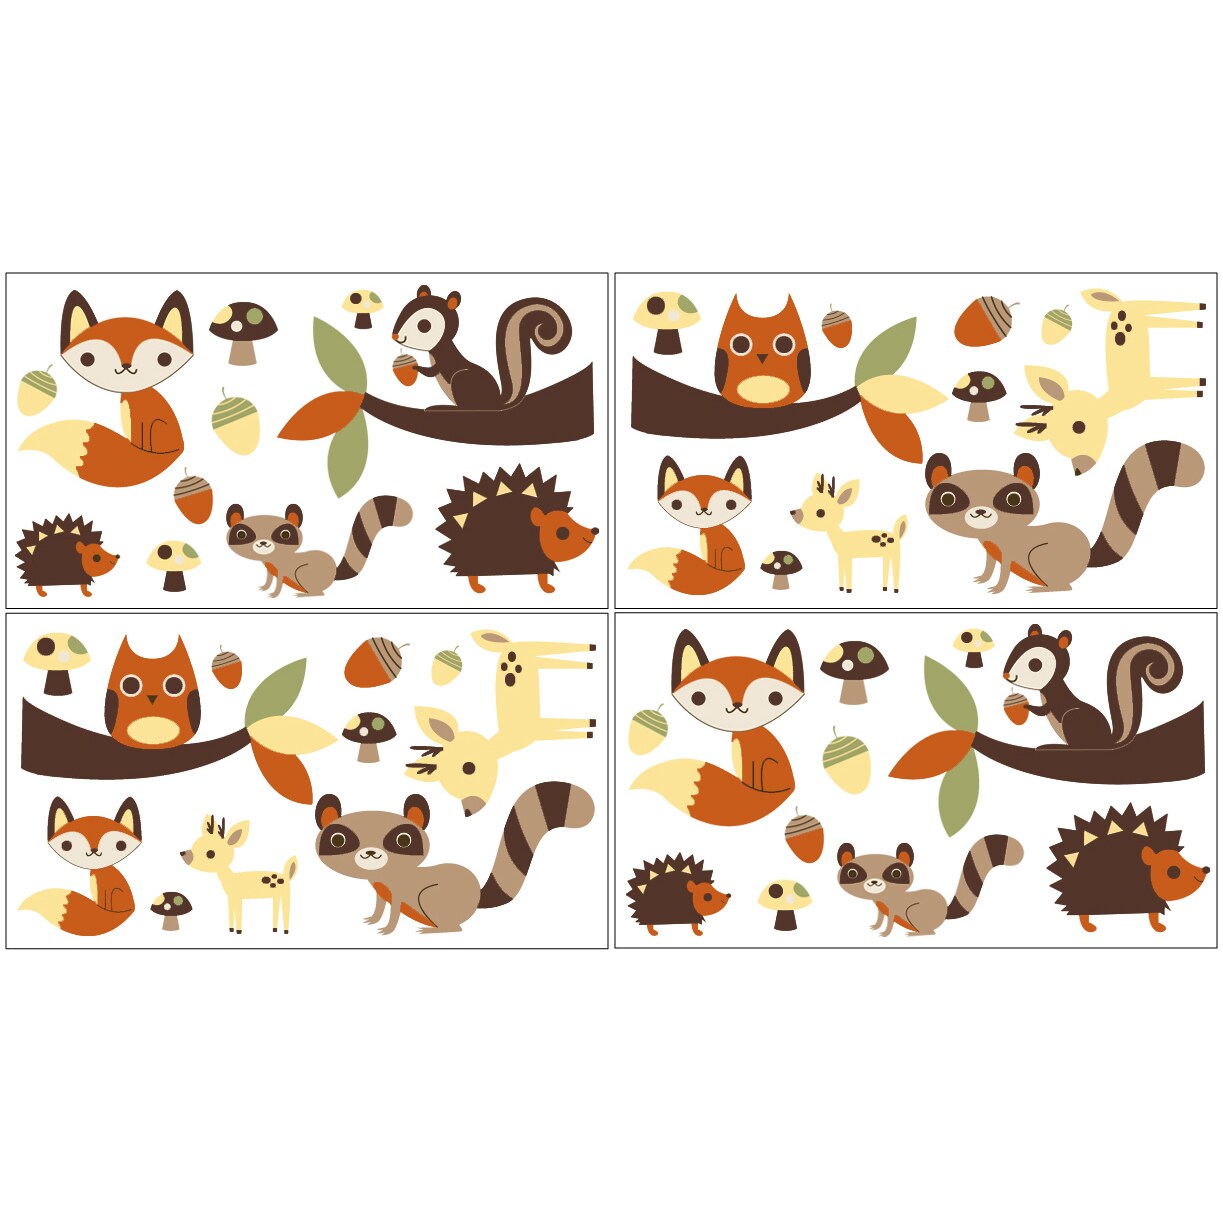 Sweet Jojo Designs Forest Friends Wall Decal Stickers (set Of 4) (PaperHanging instructions Easy peel and stick backingDimensions (each) 10 inches high x 18 inches wideNOTE These decals are intended for standard flat wall finishes and may not adhere co